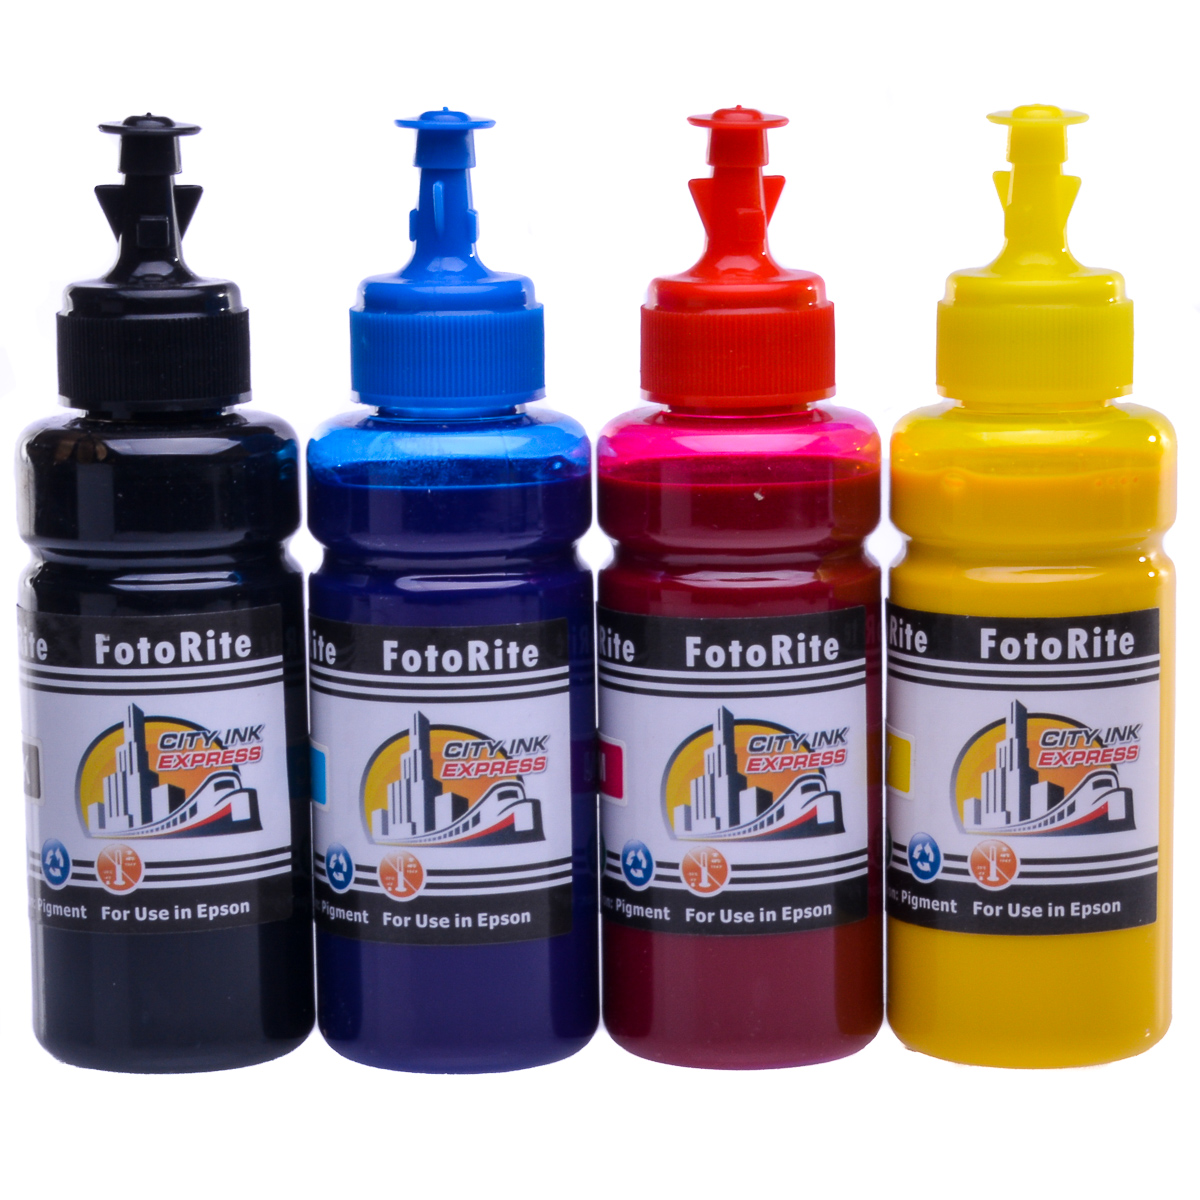 Cheap Multipack pigment ink refill replaces Epson WF-4725DWF